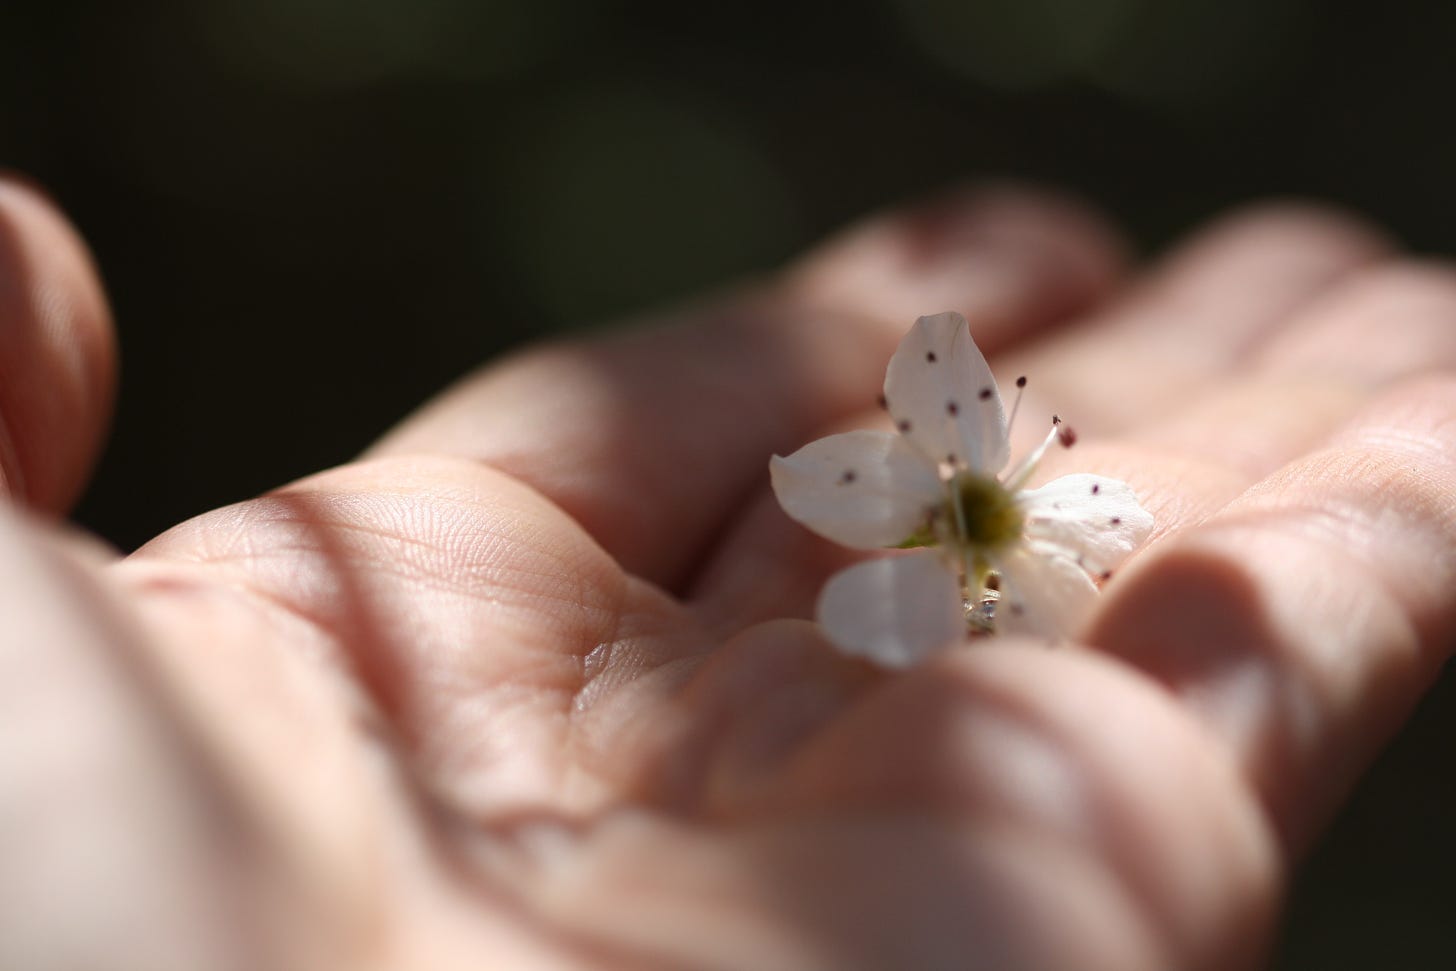 a white blossom held in the palm of my hand